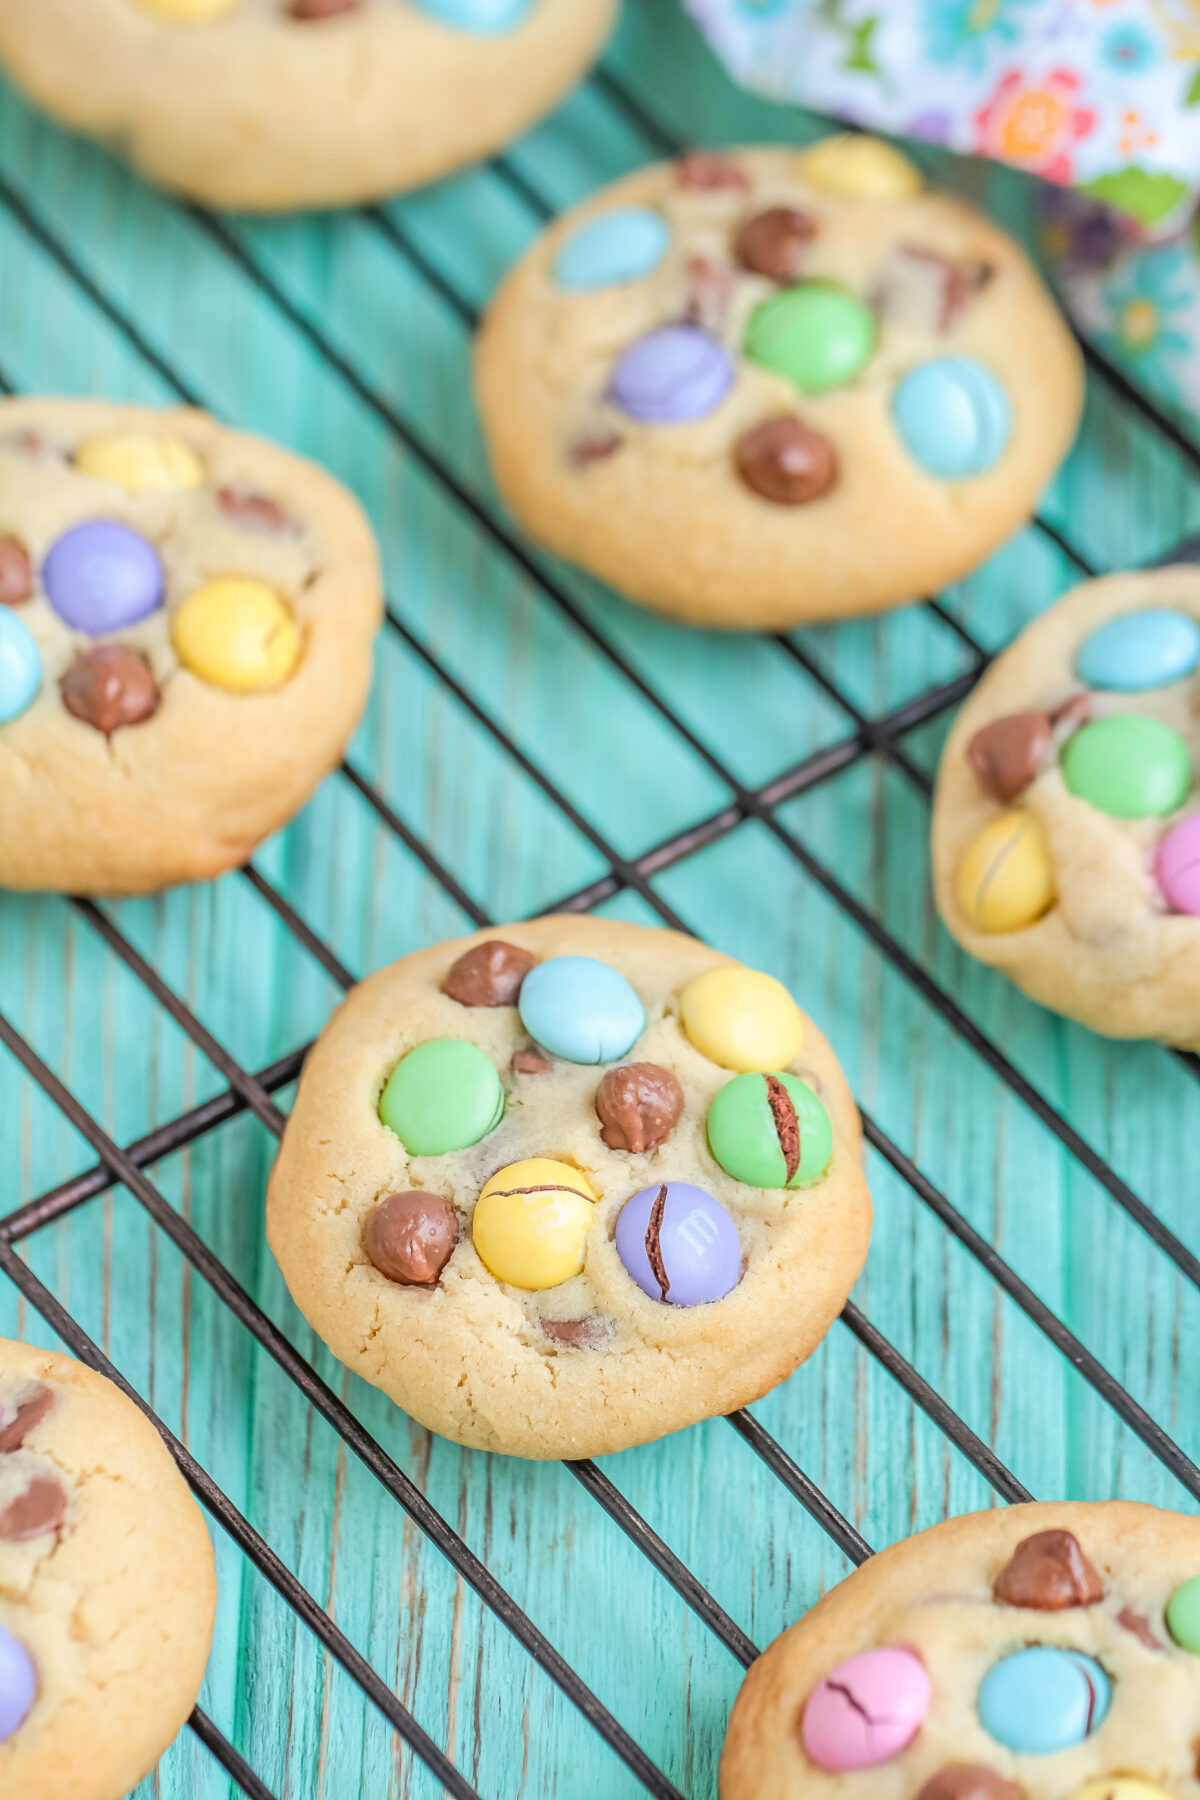 Make your Easter celebrations even sweeter with this delicious, easy-to-follow recipe for homemade Easter chocolate chip cookies.